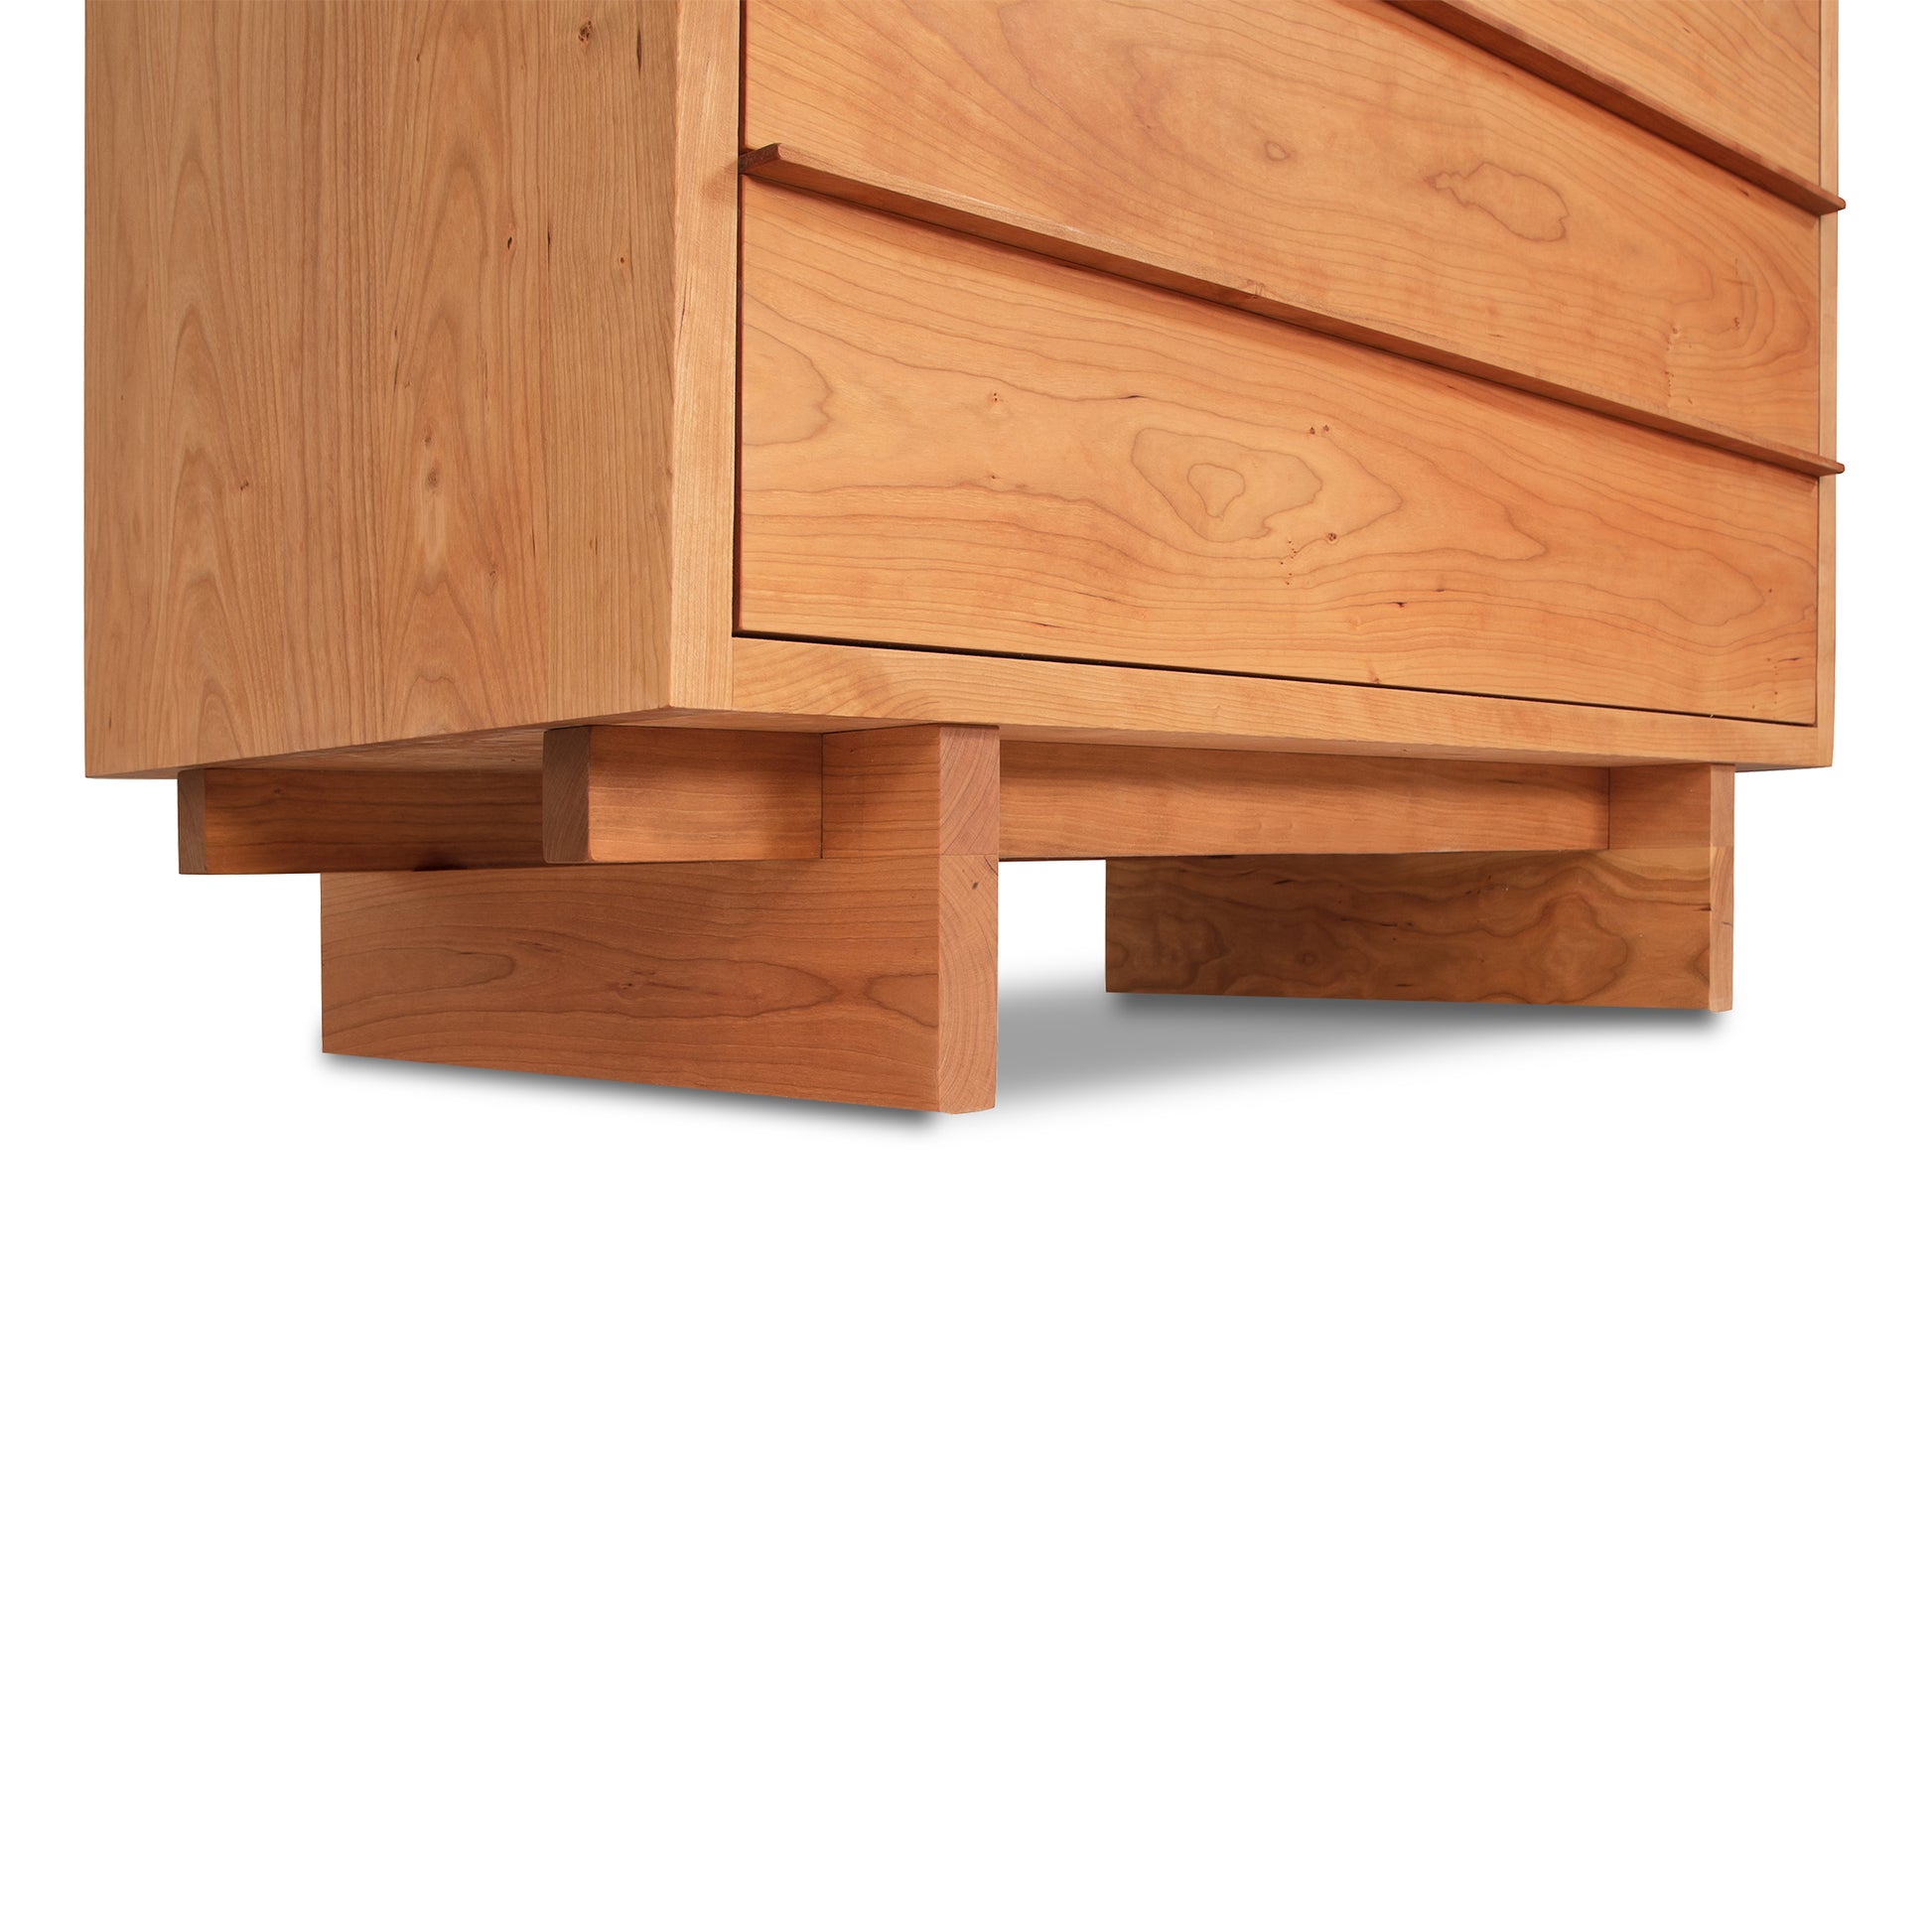 An image of a Vermont Furniture Designs Kipling 5-Drawer Wide Chest.